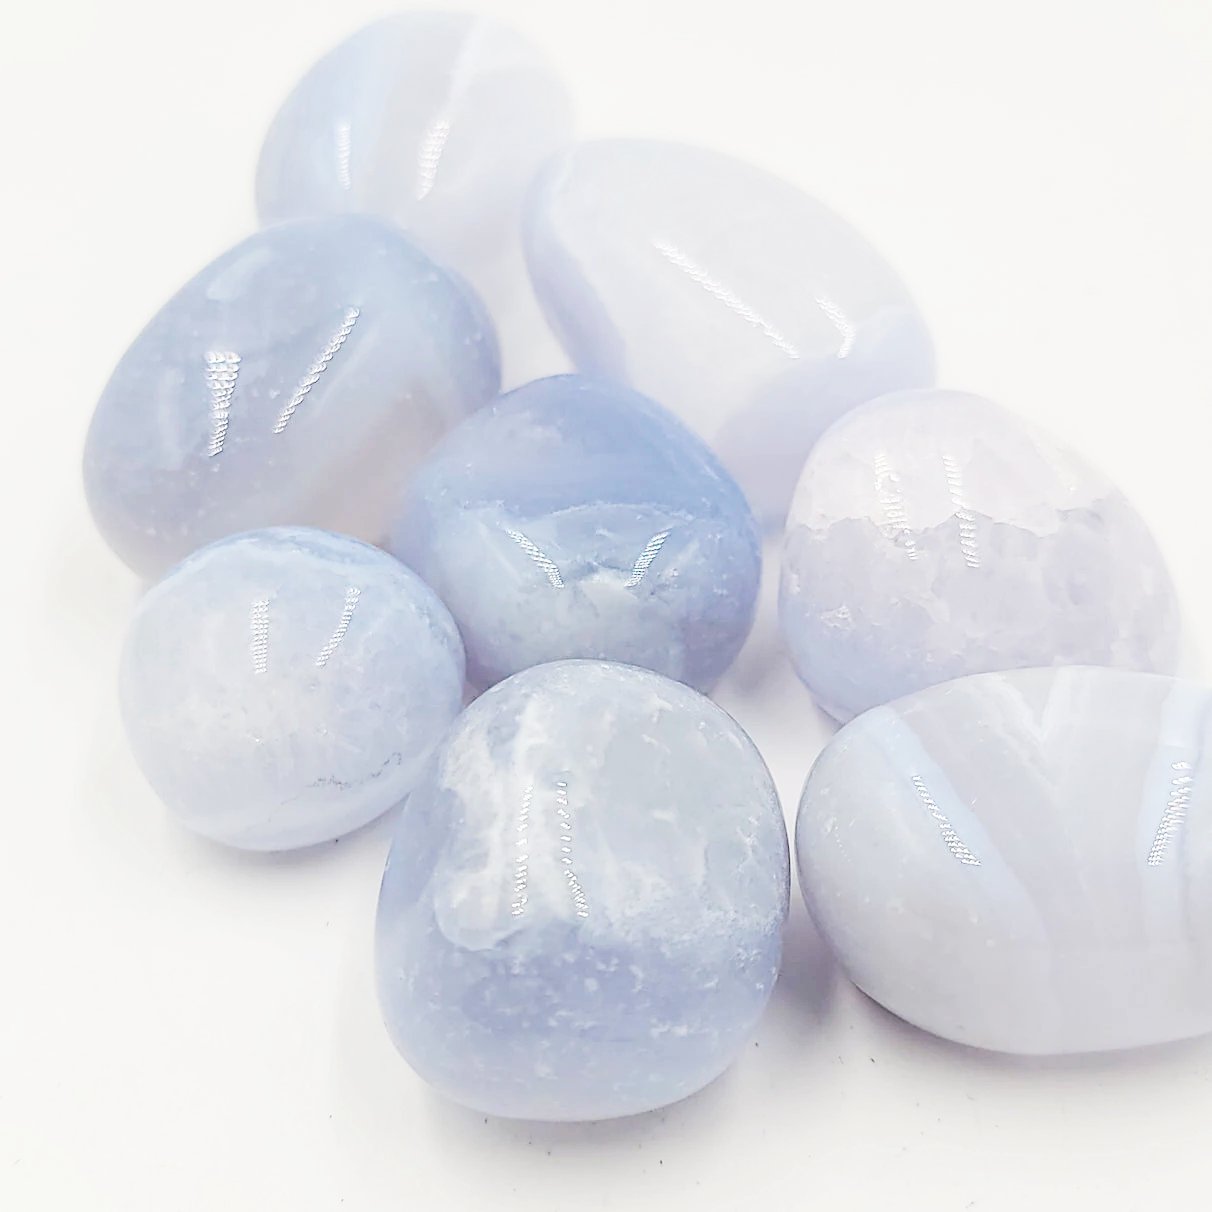 Blue Lace Agate Tumbled Stone - Elevated Metaphysical